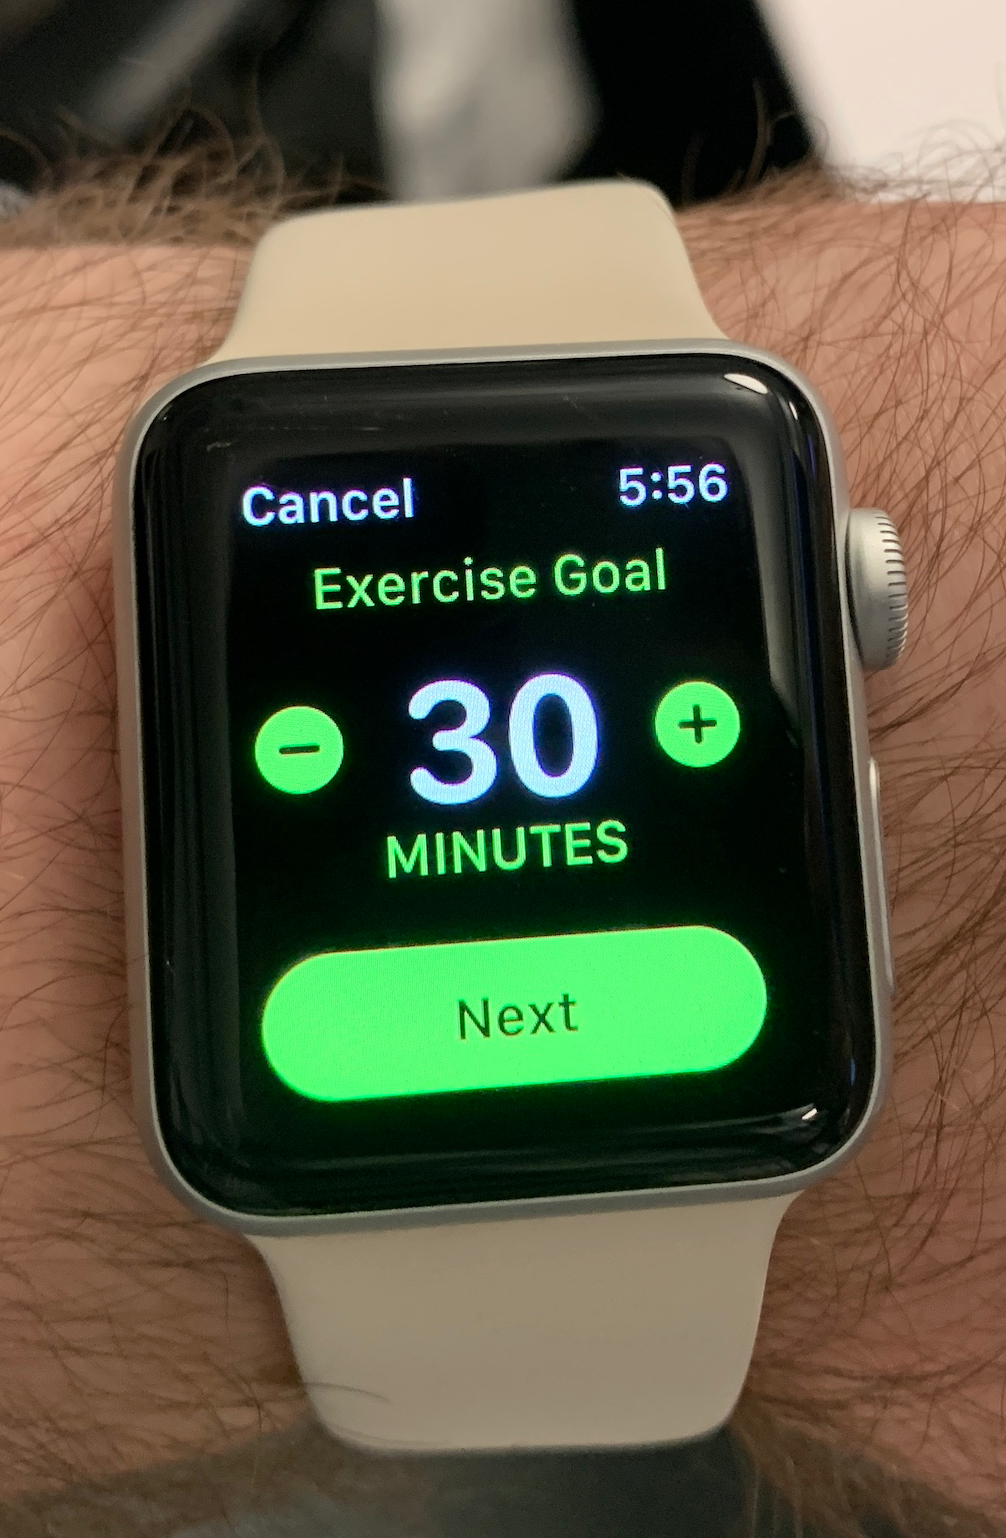 The menu that lets you change your Exercise Goal on an Apple Watch.